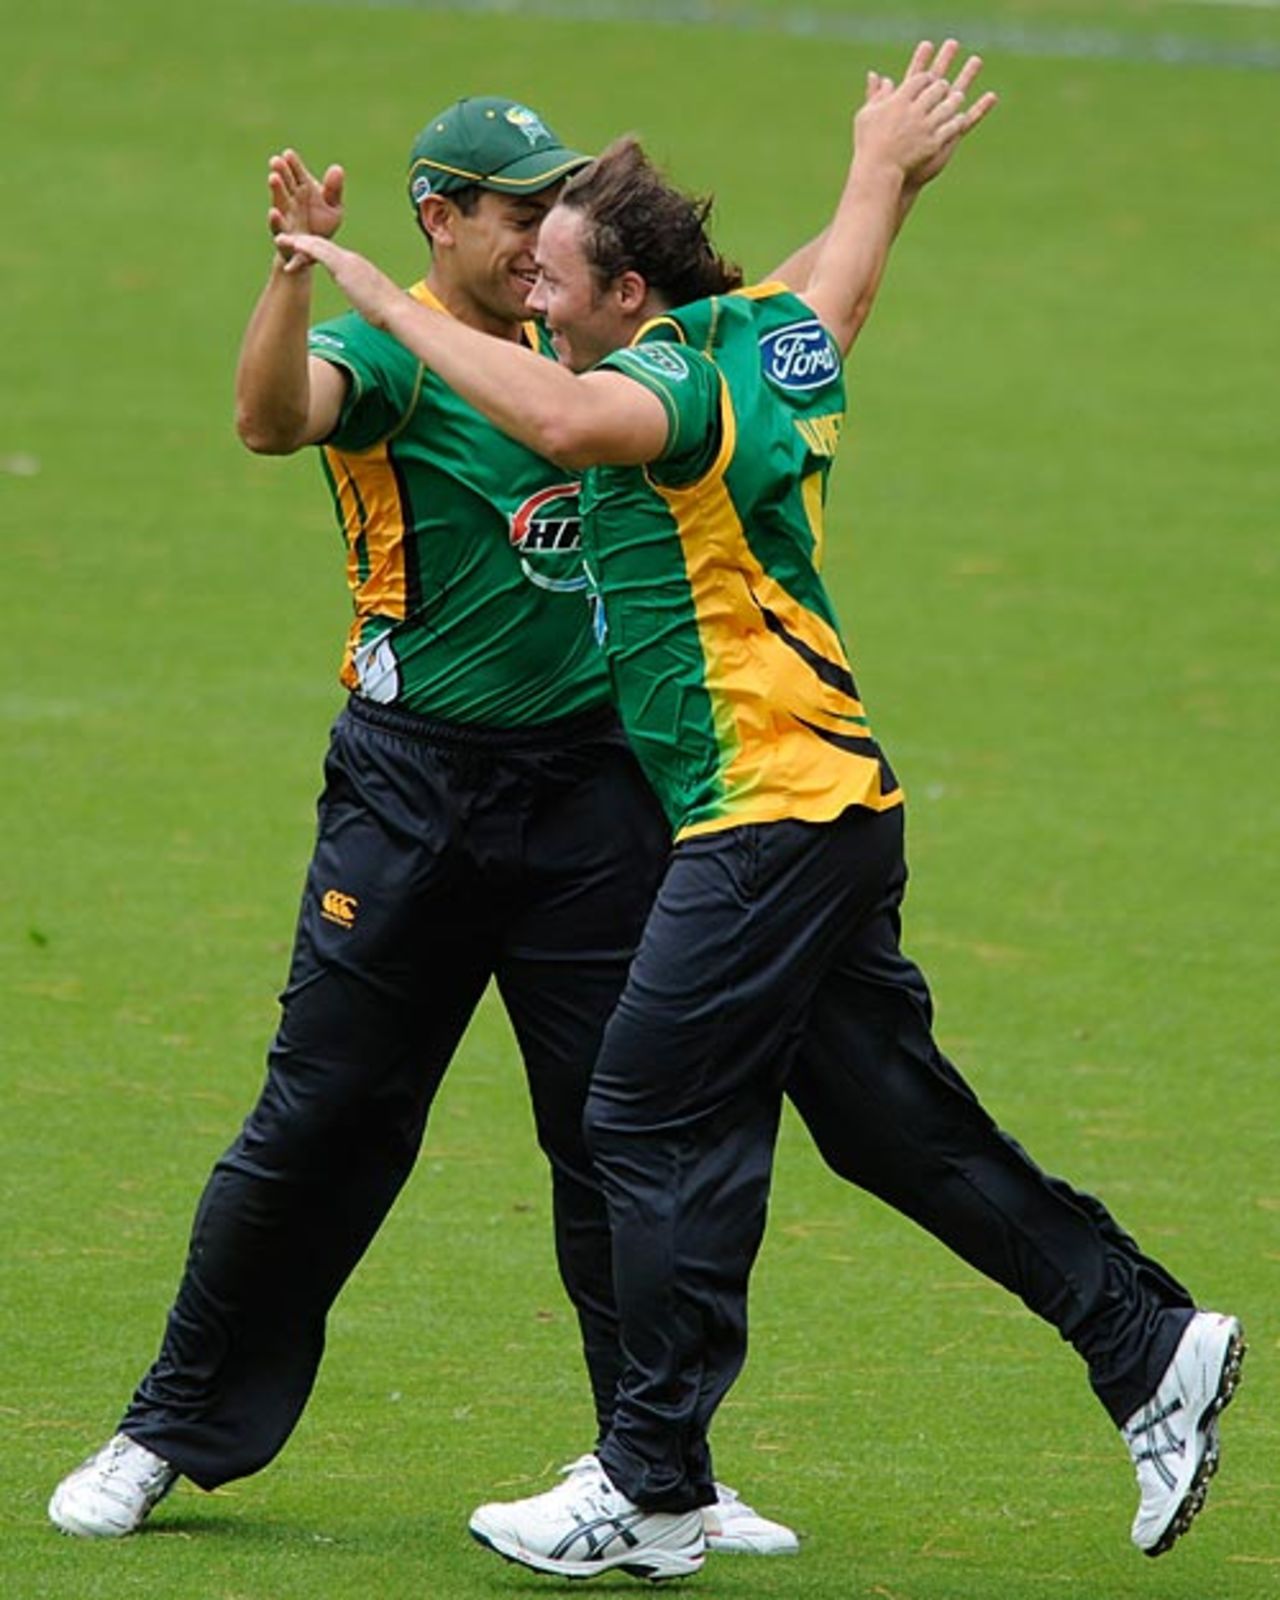 Ross Taylor and Graham Napier celebrate a wicket, Central Districts v Auckland, HRV Cup final, New Plymouth, January 31, 2009